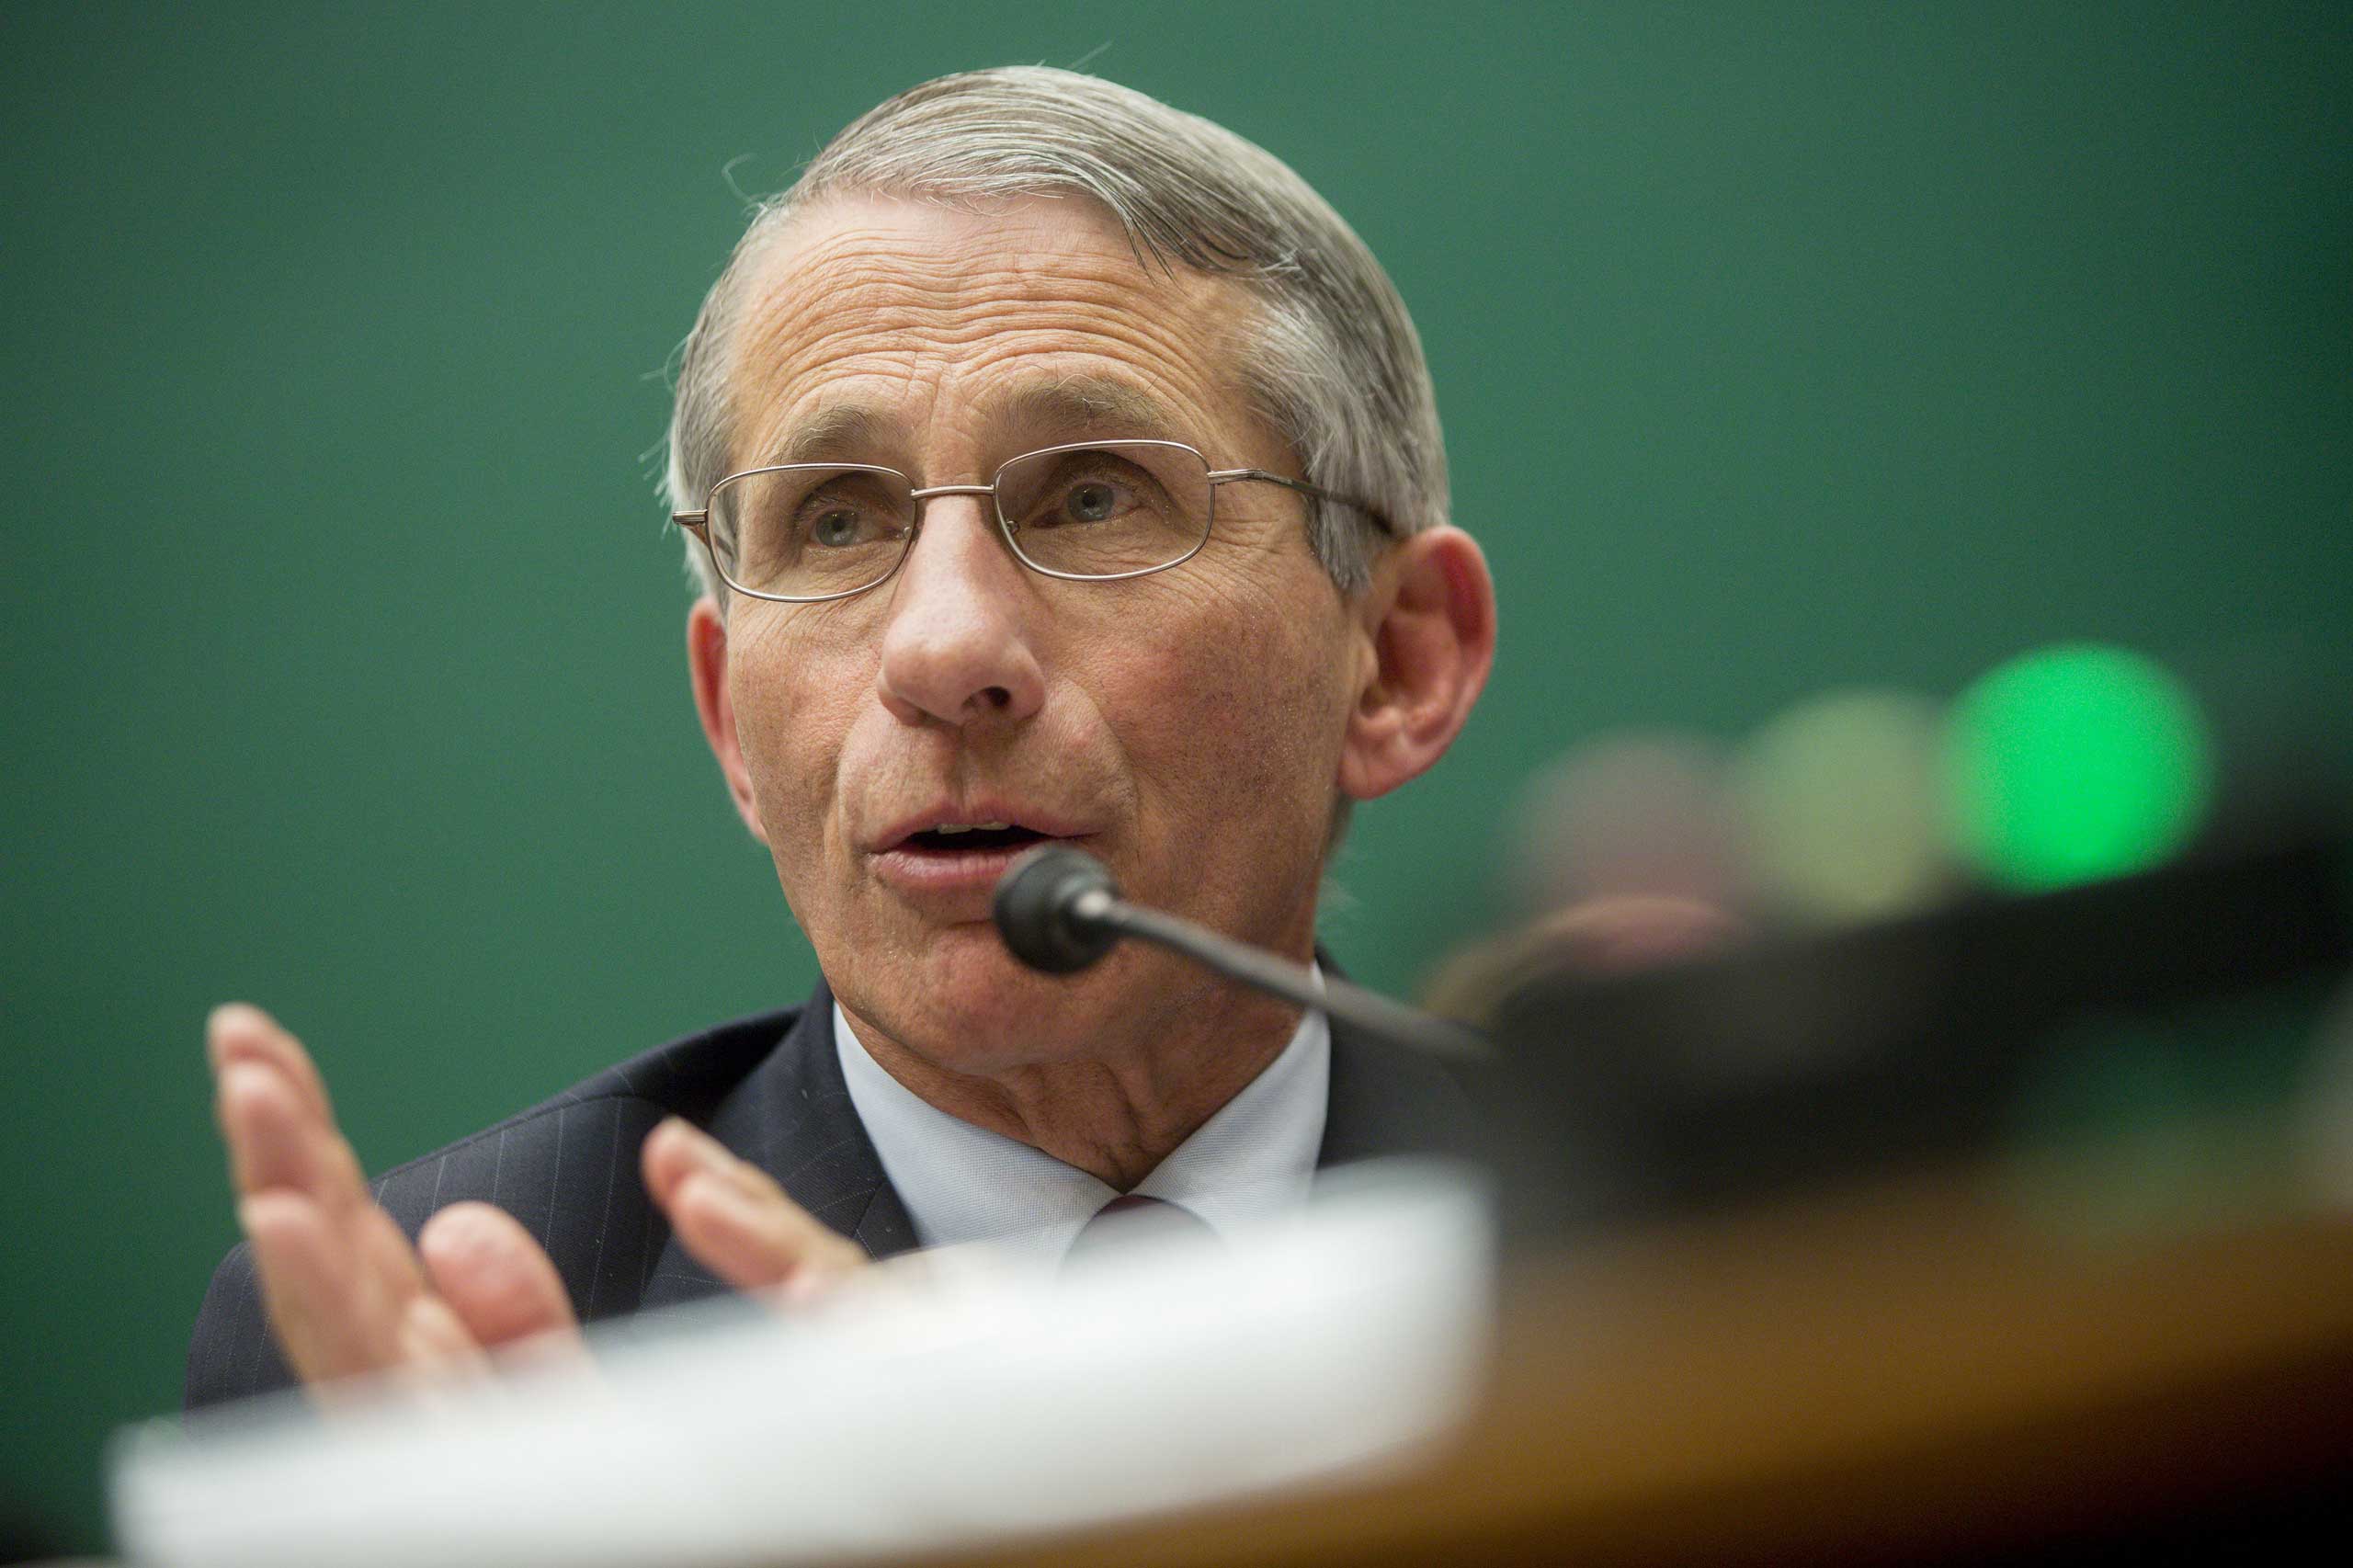 Anthony Fauci, director of the National Institute of Allergy and Infectious Diseases, speaks during a House Energy and Commerce Committee subcommittee hearing on the U.S. public health response to the Ebola outbreak in Washington, D.C., Oct. 2014. (Andrew Harrer—Bloomberg/Getty Images)